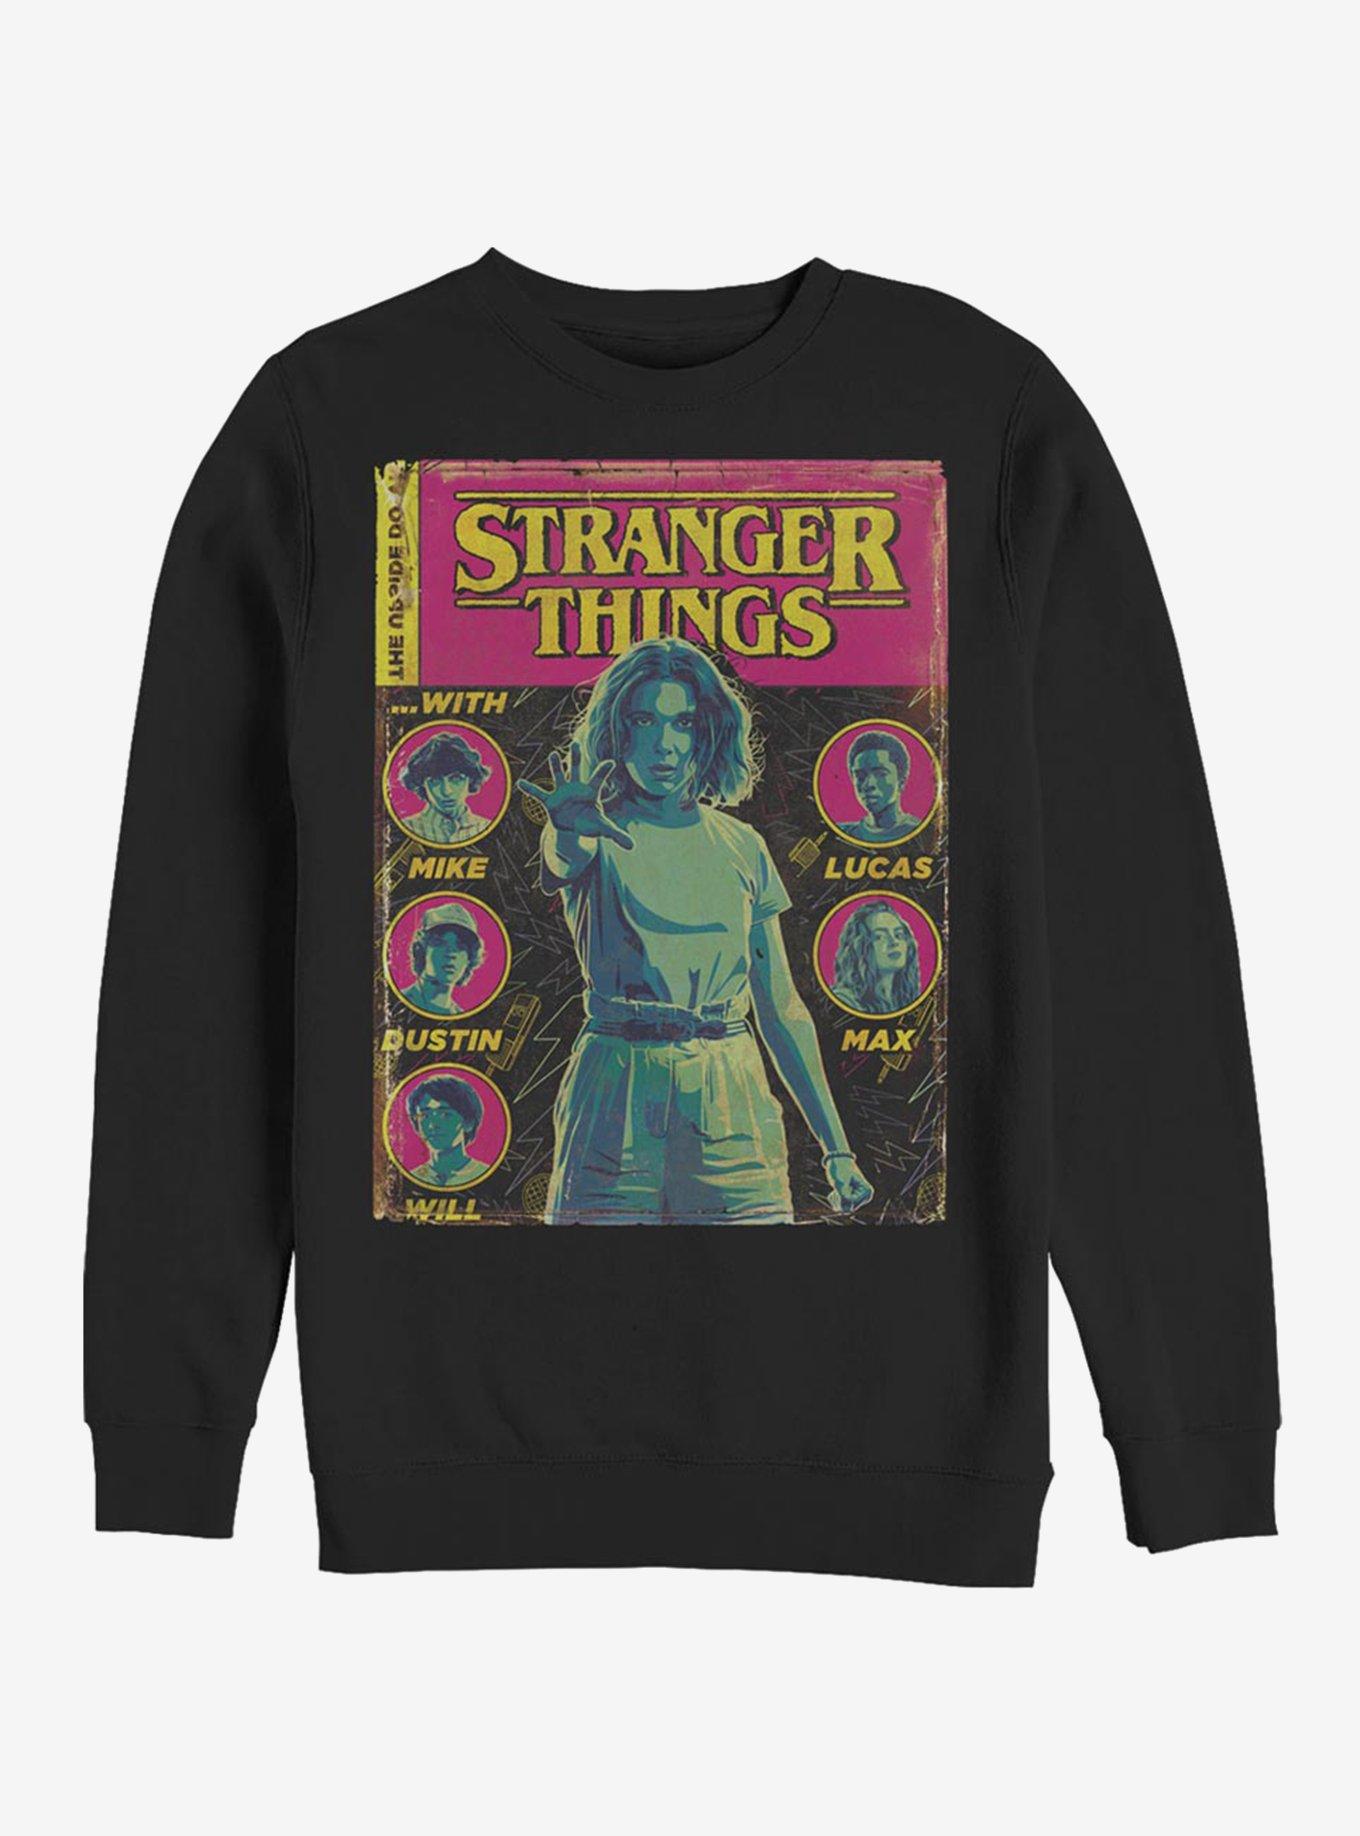 Boy's Stranger Things Vintage Comic Book Cover T-Shirt - Kelly Green - Large